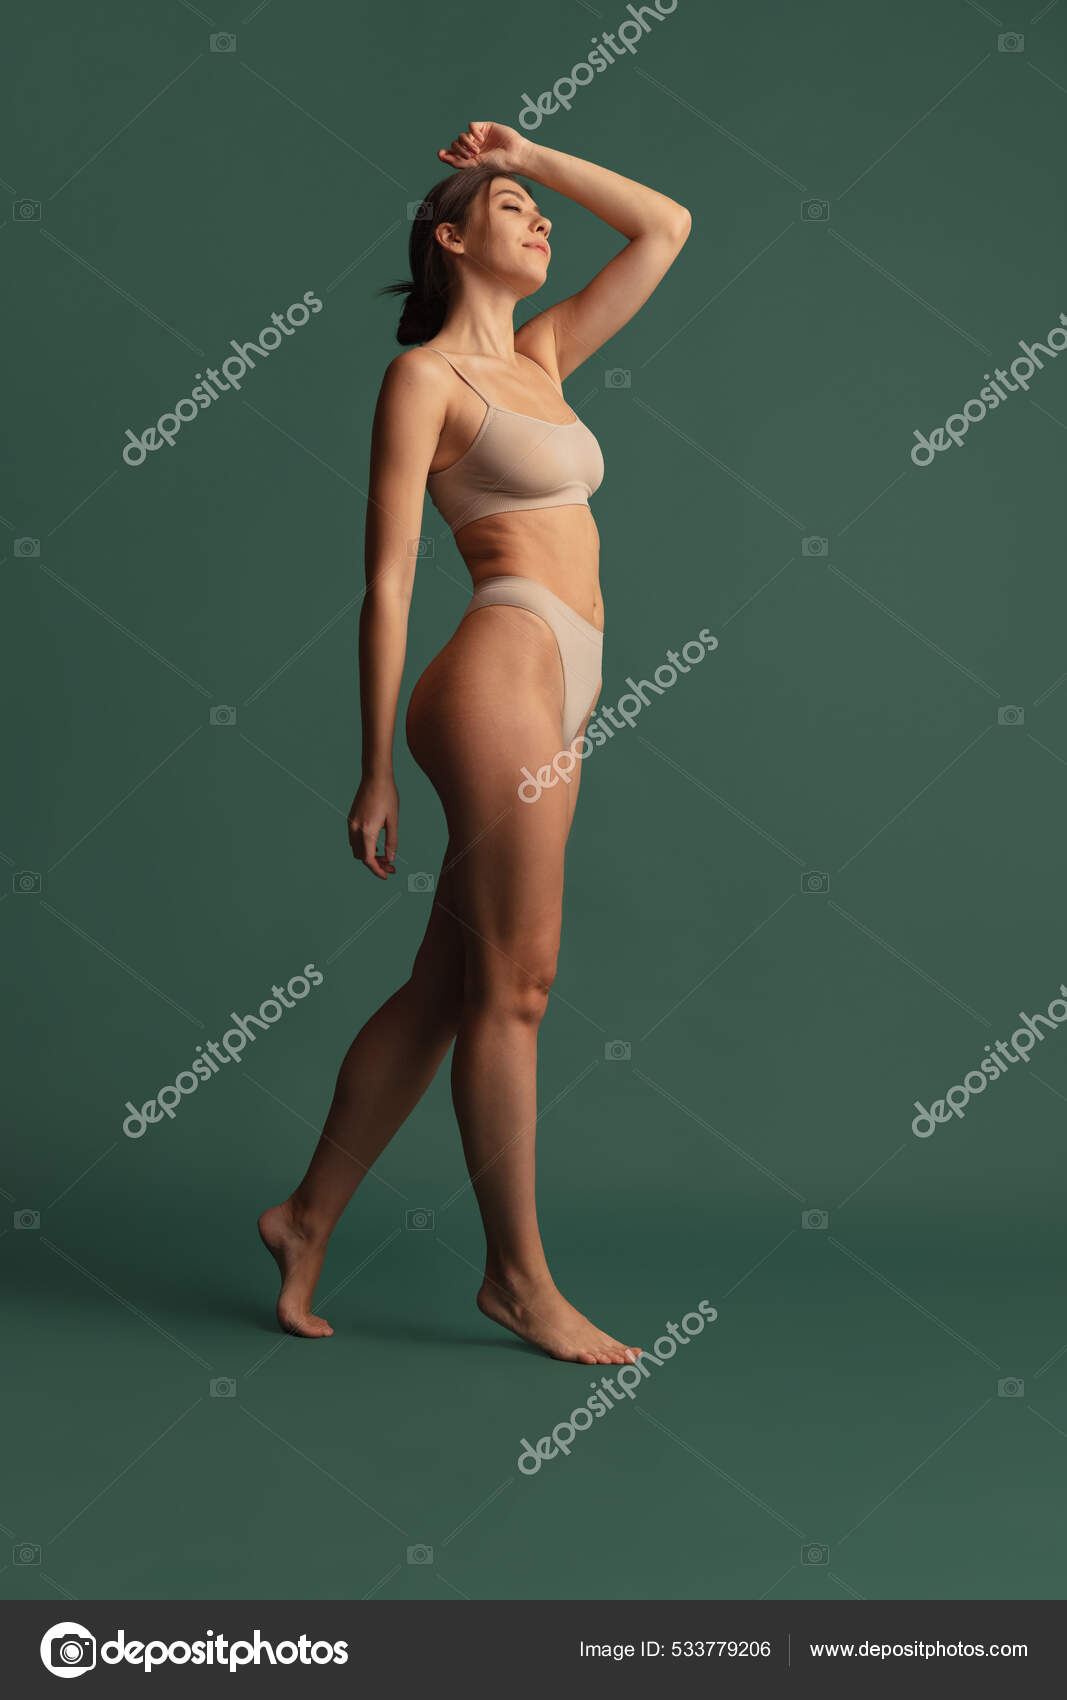 Portrait of young beautiful slim woman in nude color underwear